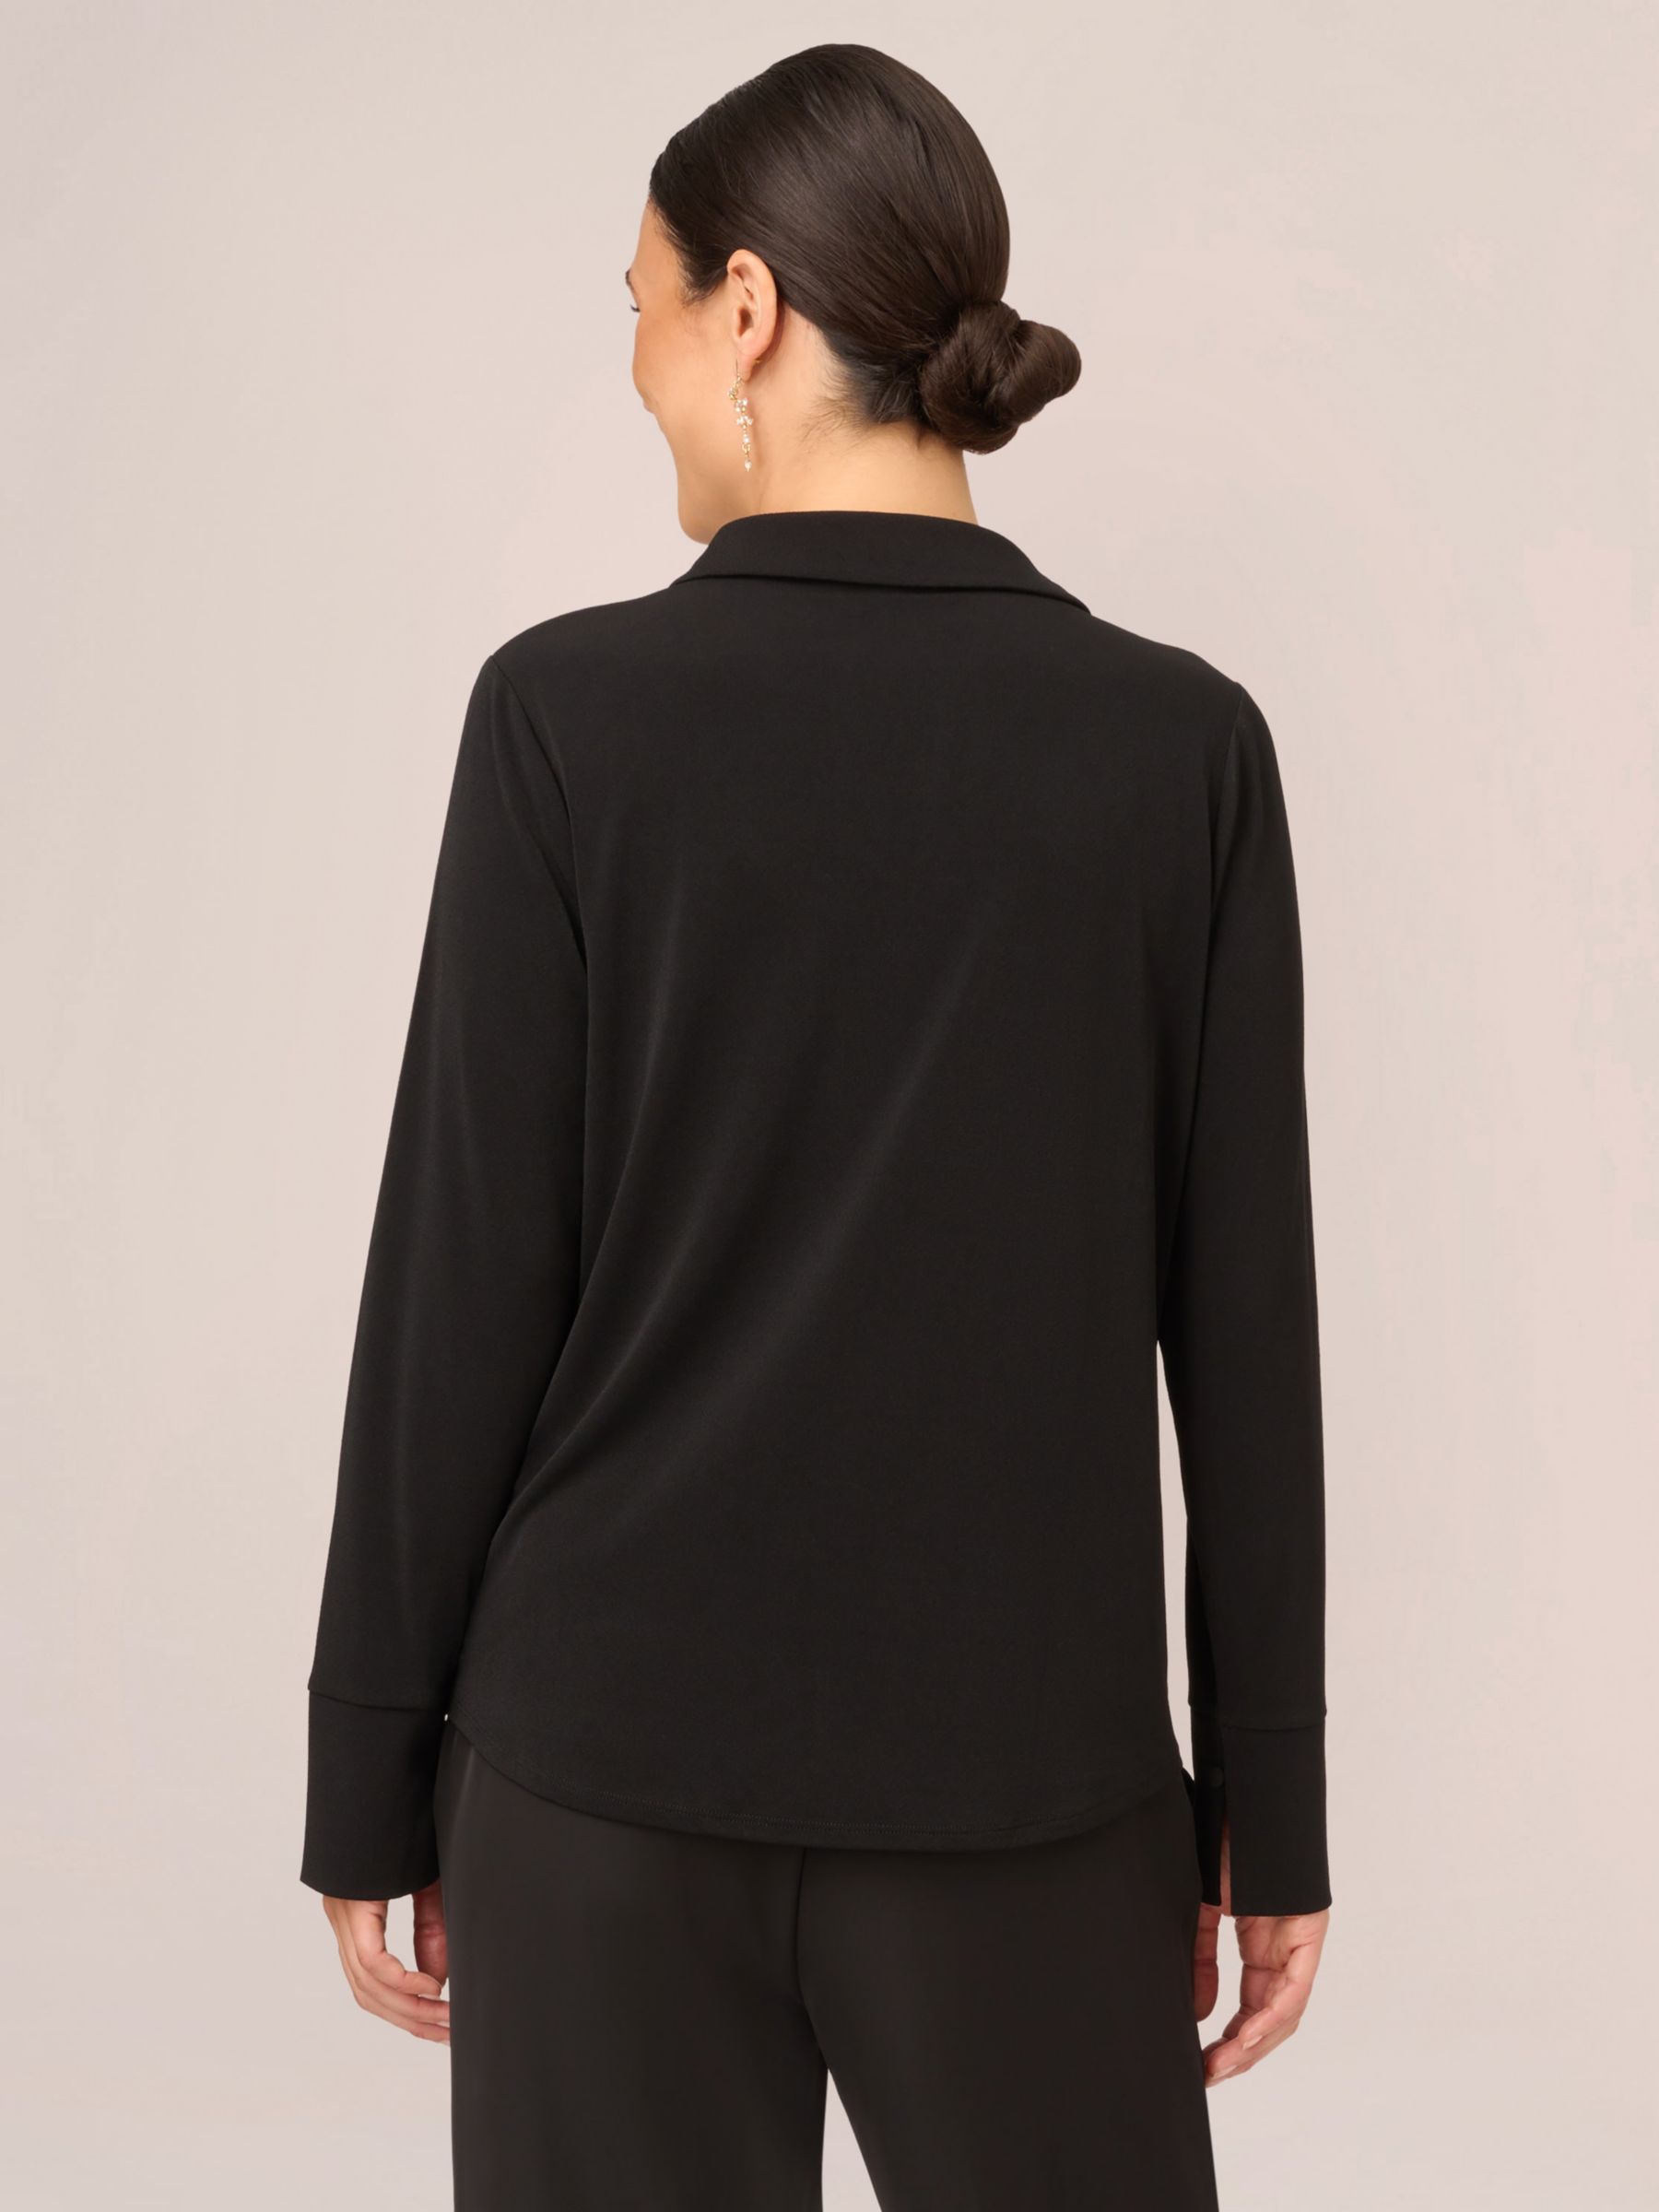 Adrianna Papell Long Sleeve Twist Front Shirt, Black at John Lewis ...